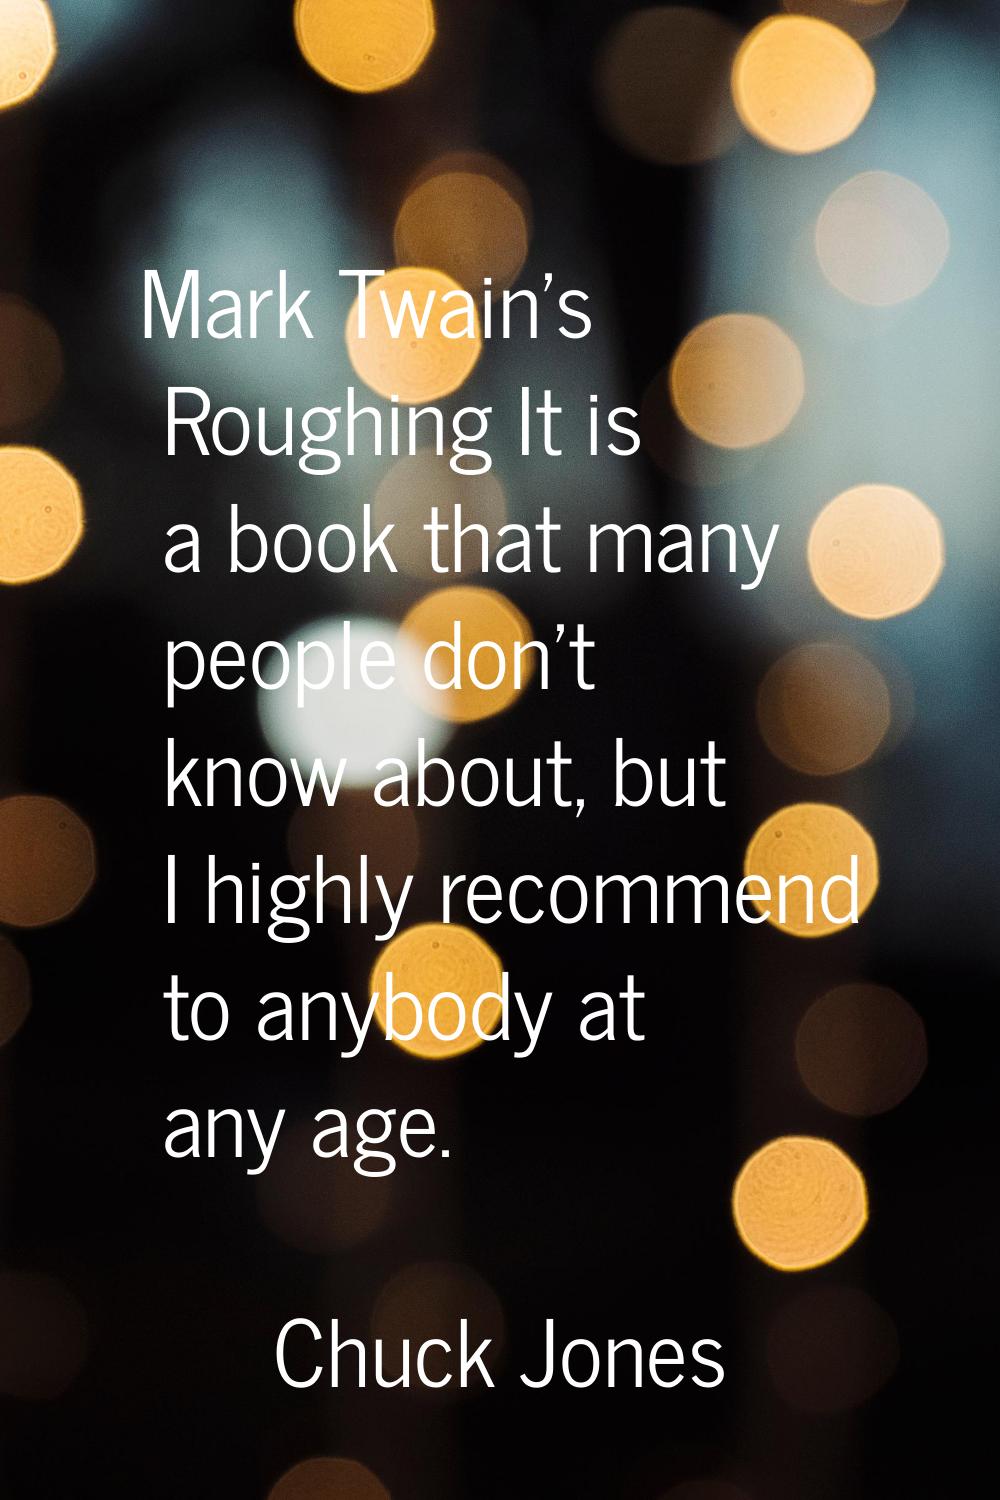 Mark Twain's Roughing It is a book that many people don't know about, but I highly recommend to any